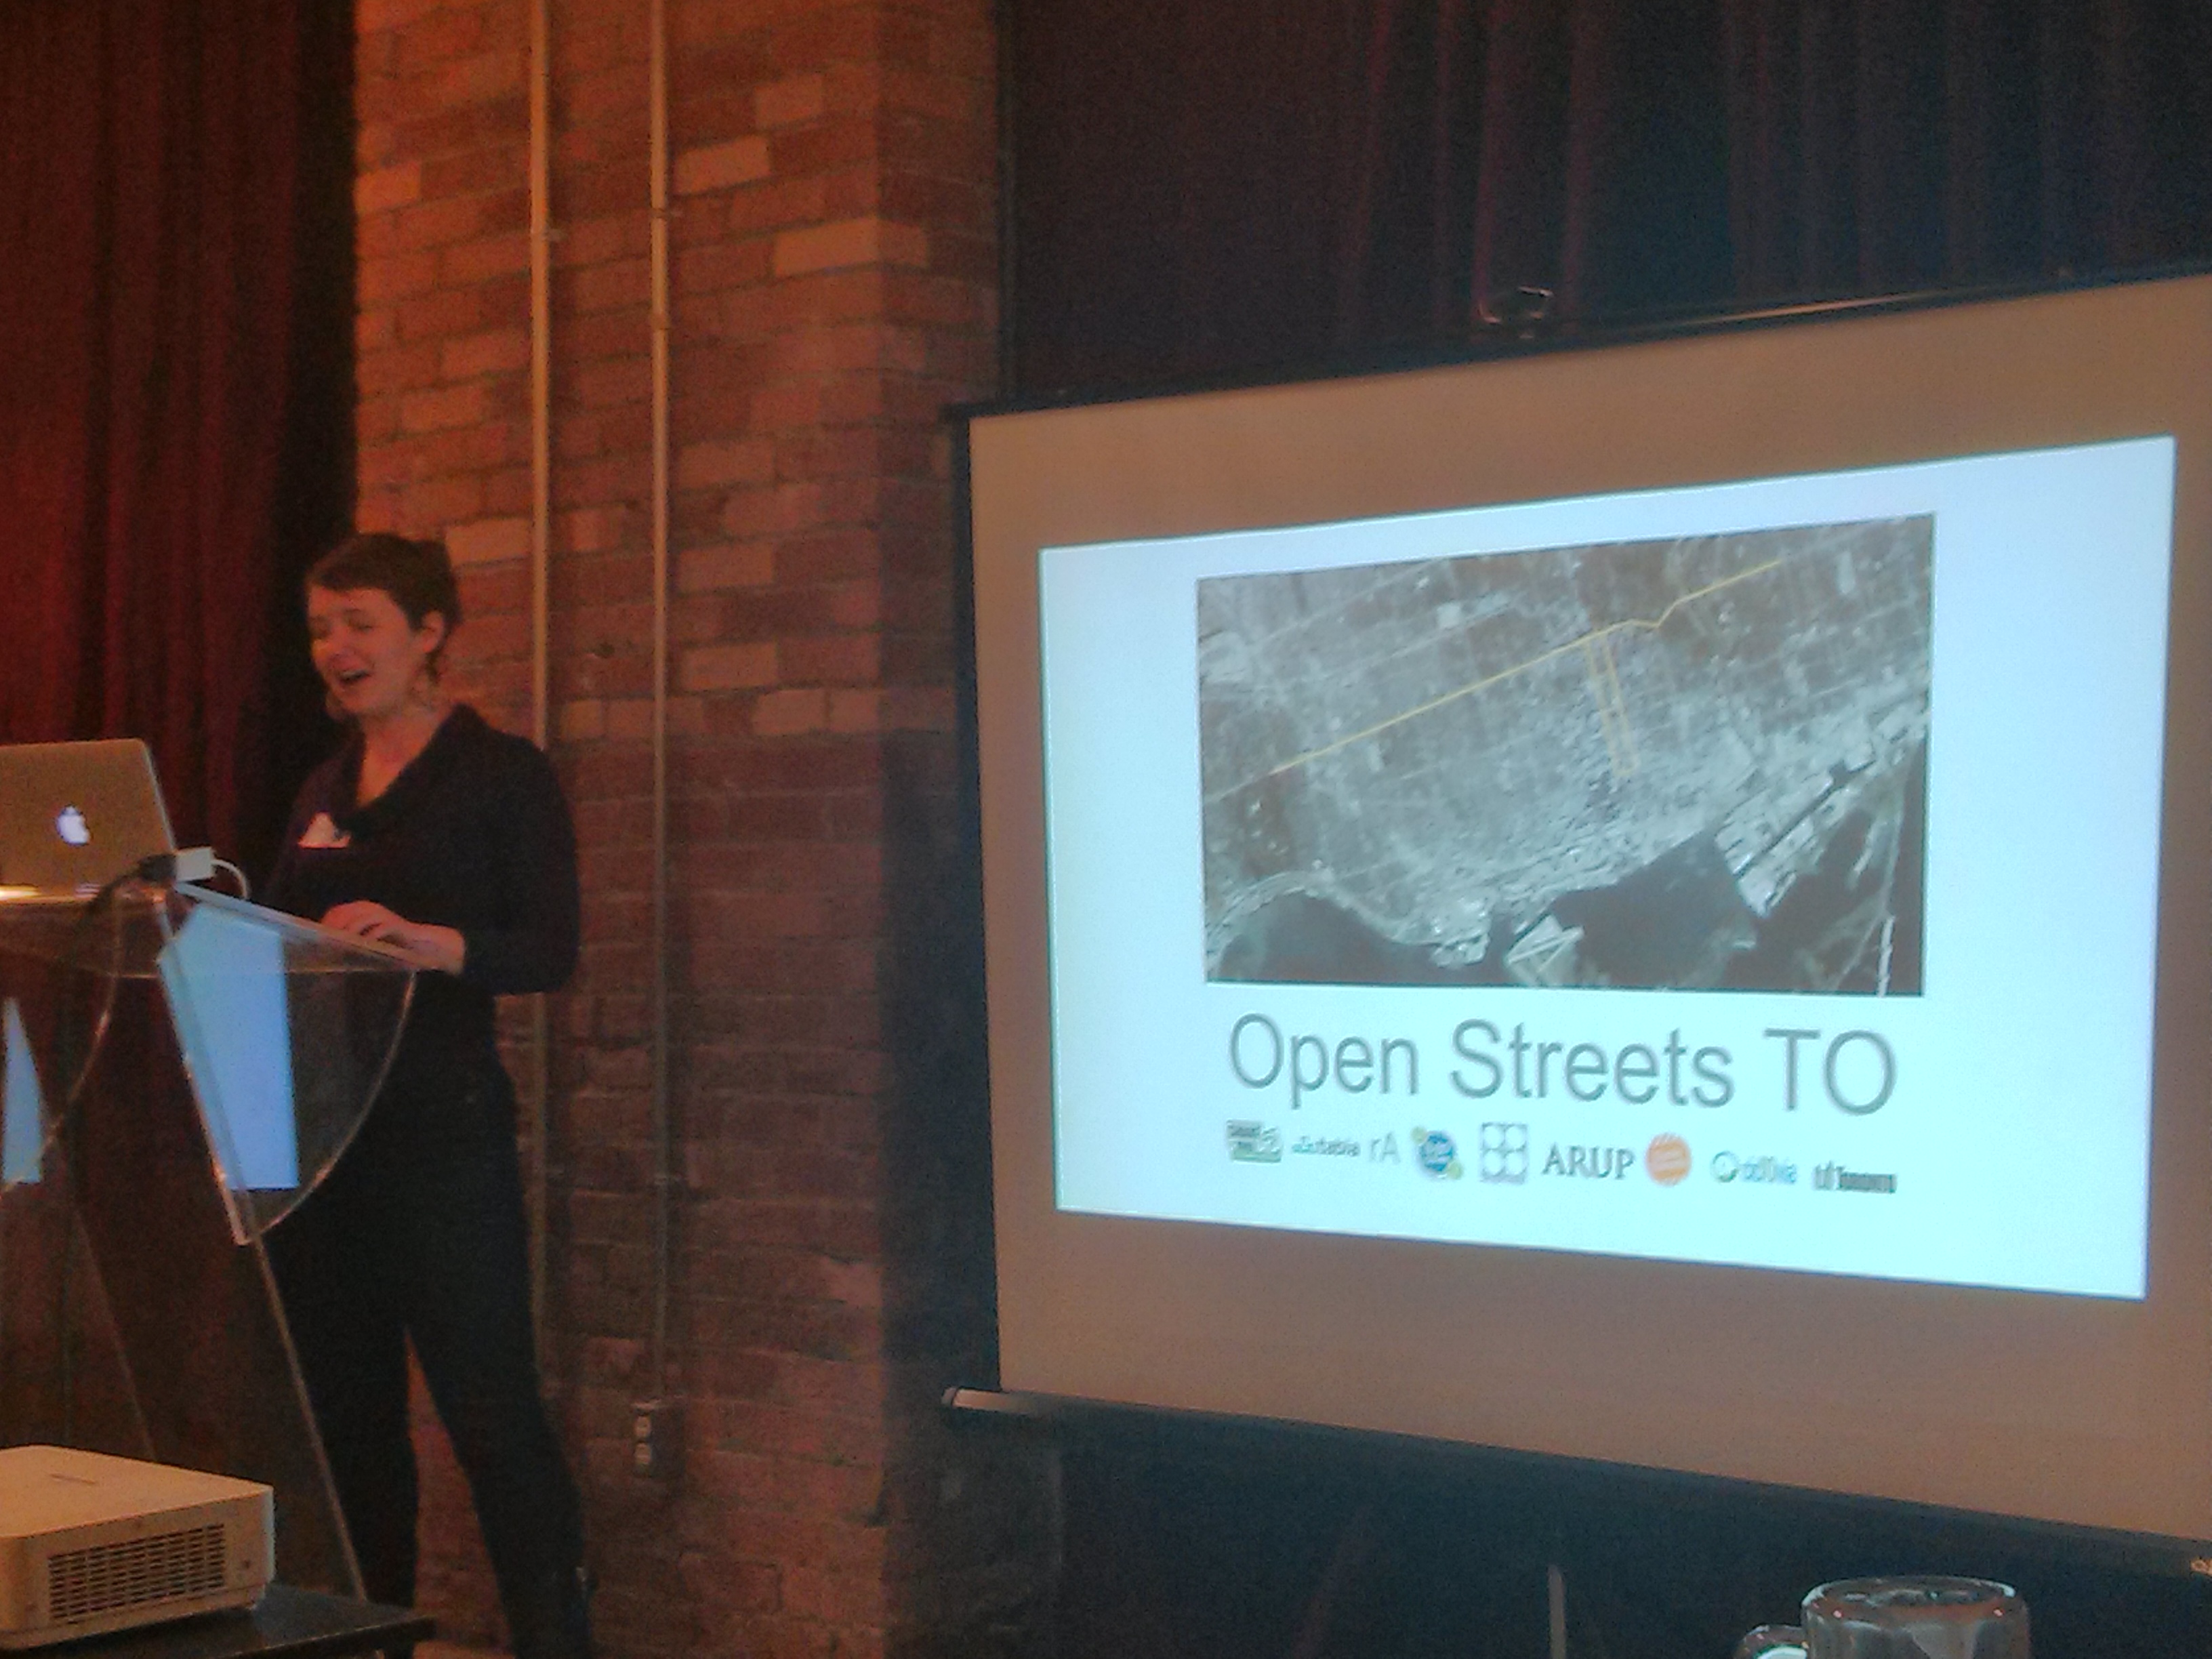 Michelle Senayah presenting Open Streets TO